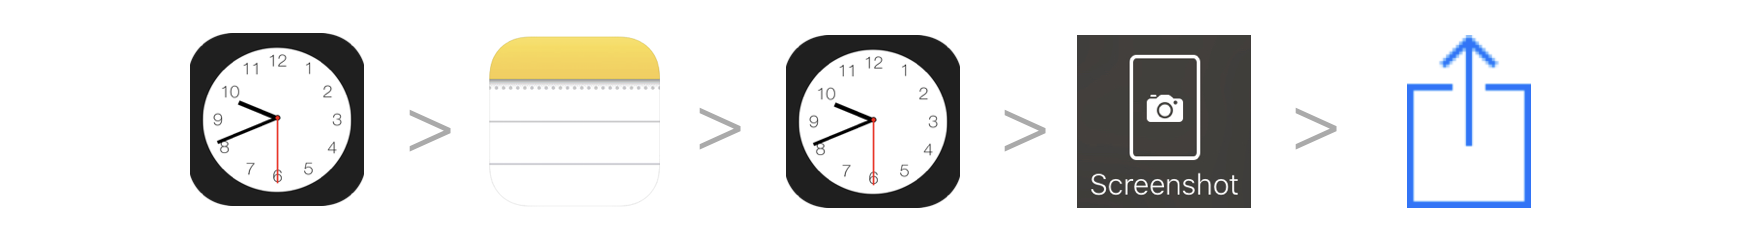 Flow of apps and tools. Clock, Notes, Clock, Screenshot, share